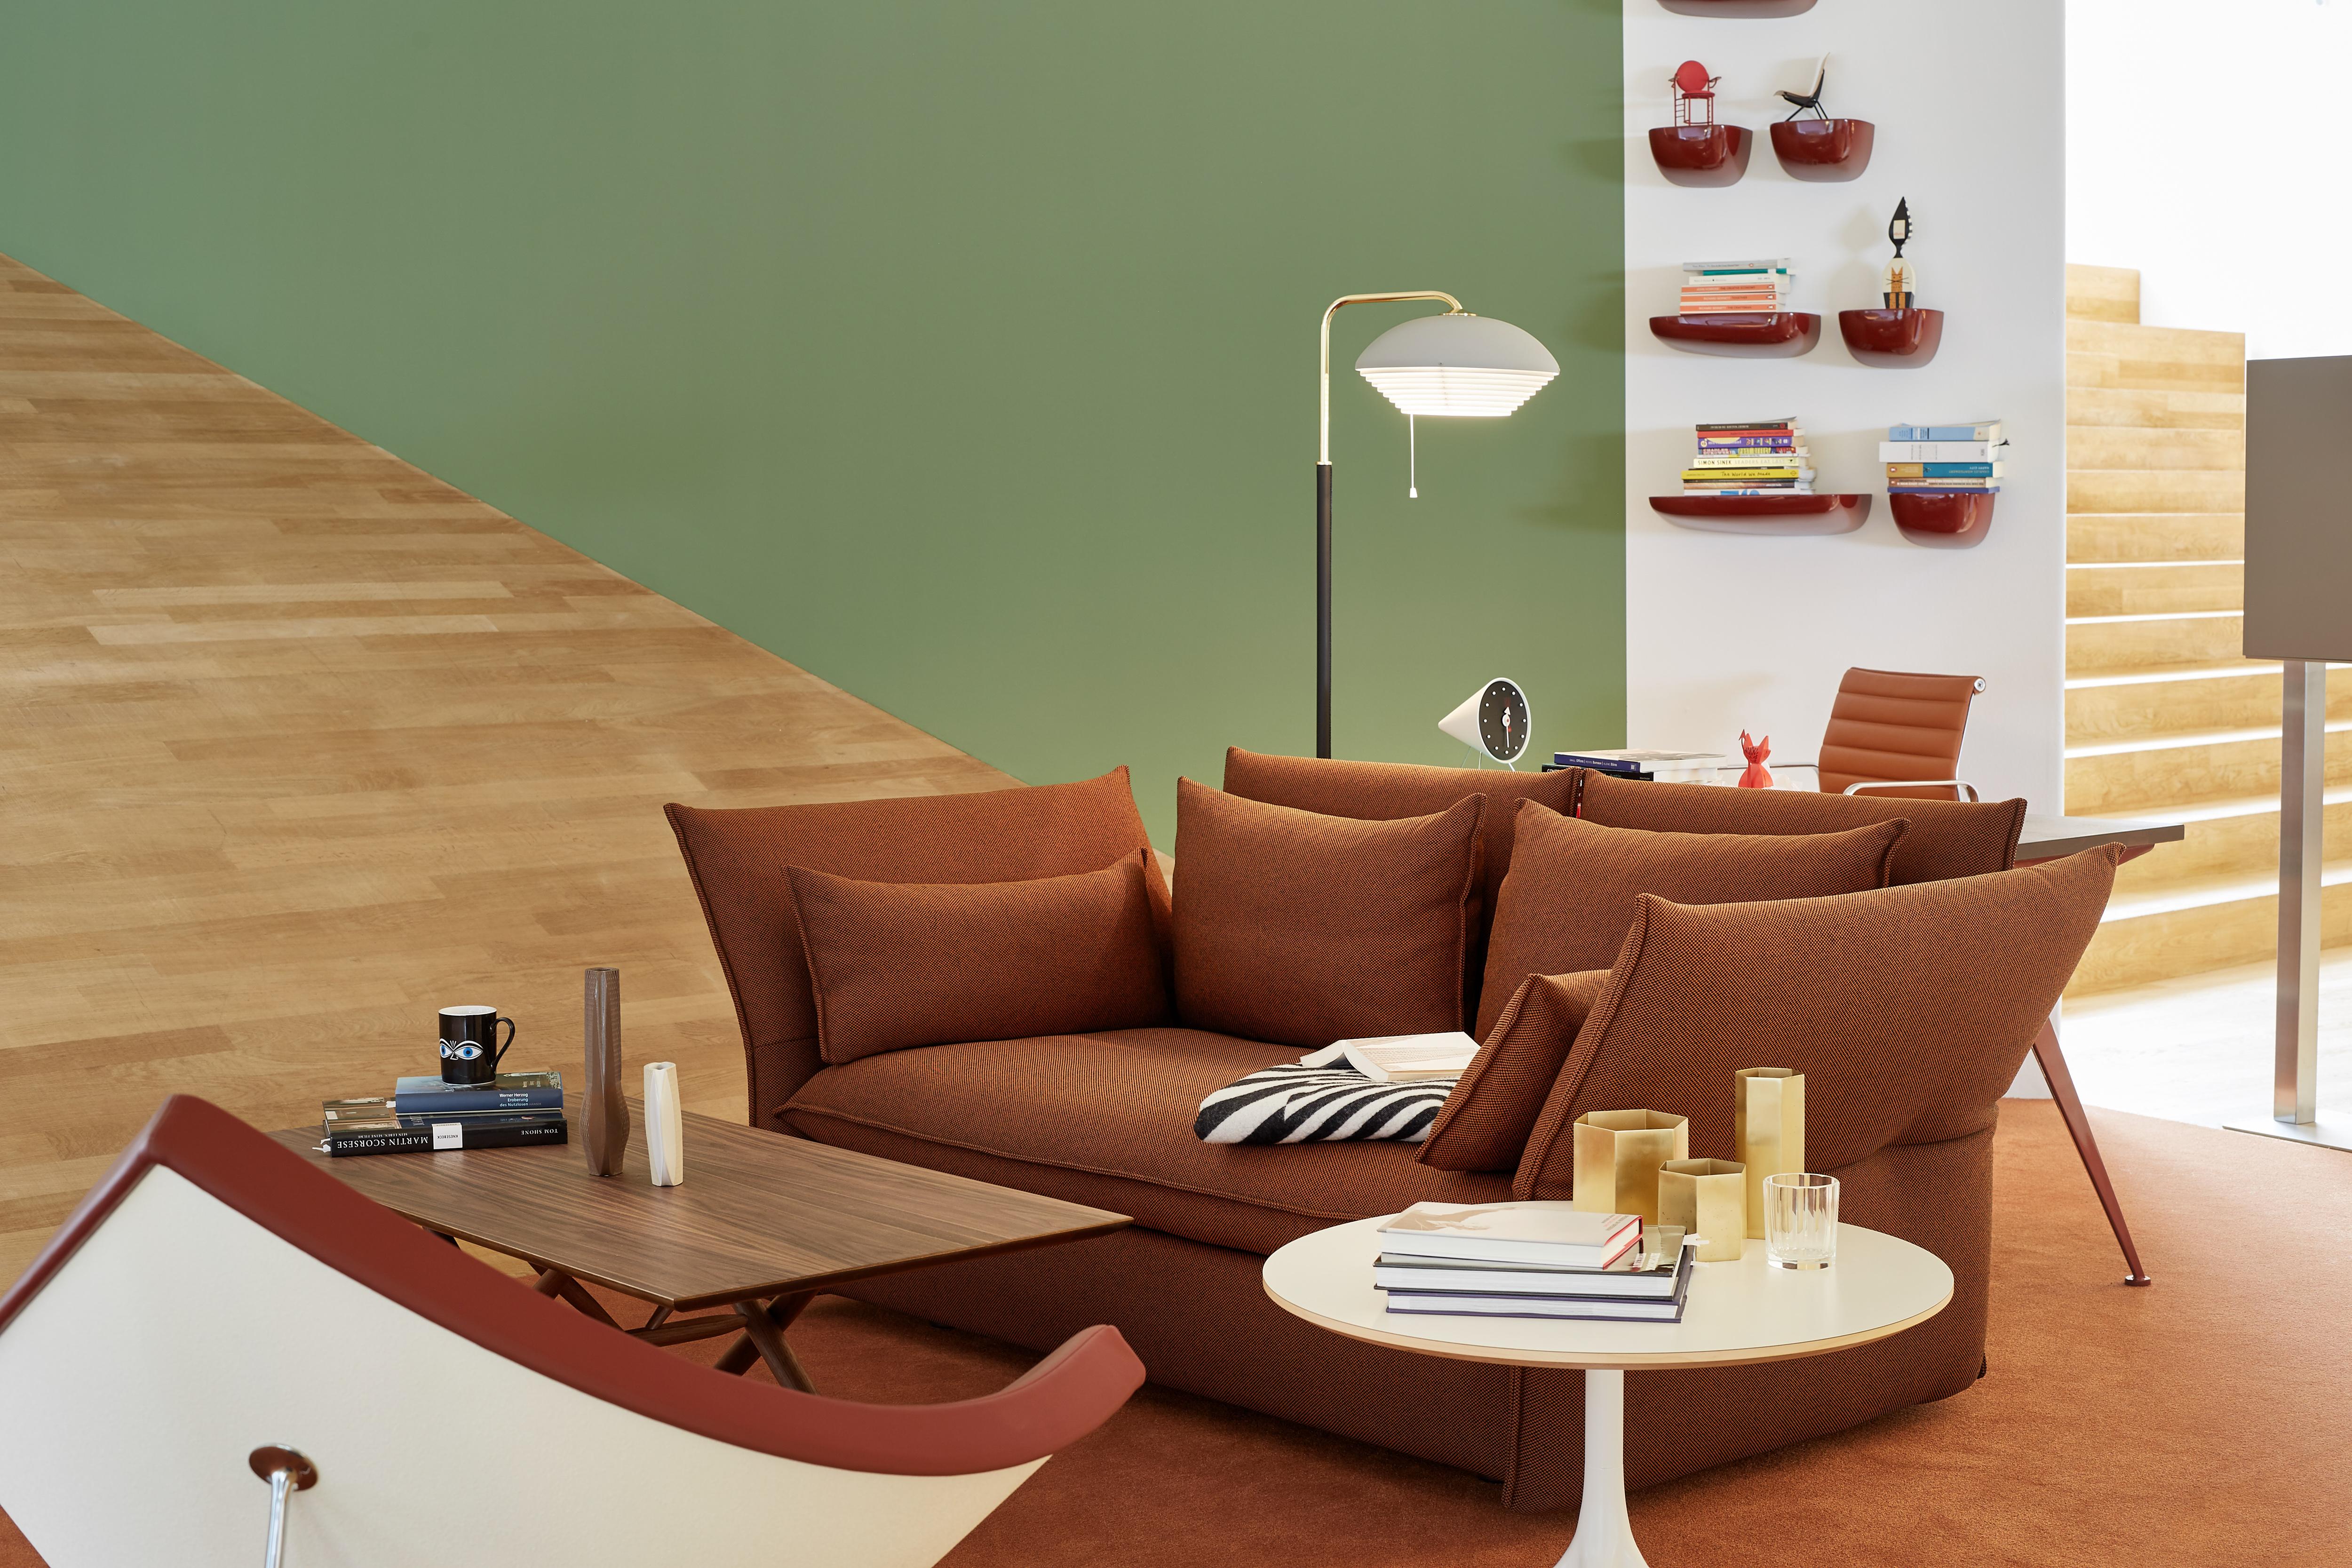 Vitra Large Corniches in Japanese Red by Ronan & Erwan Bouroullec im Angebot 2